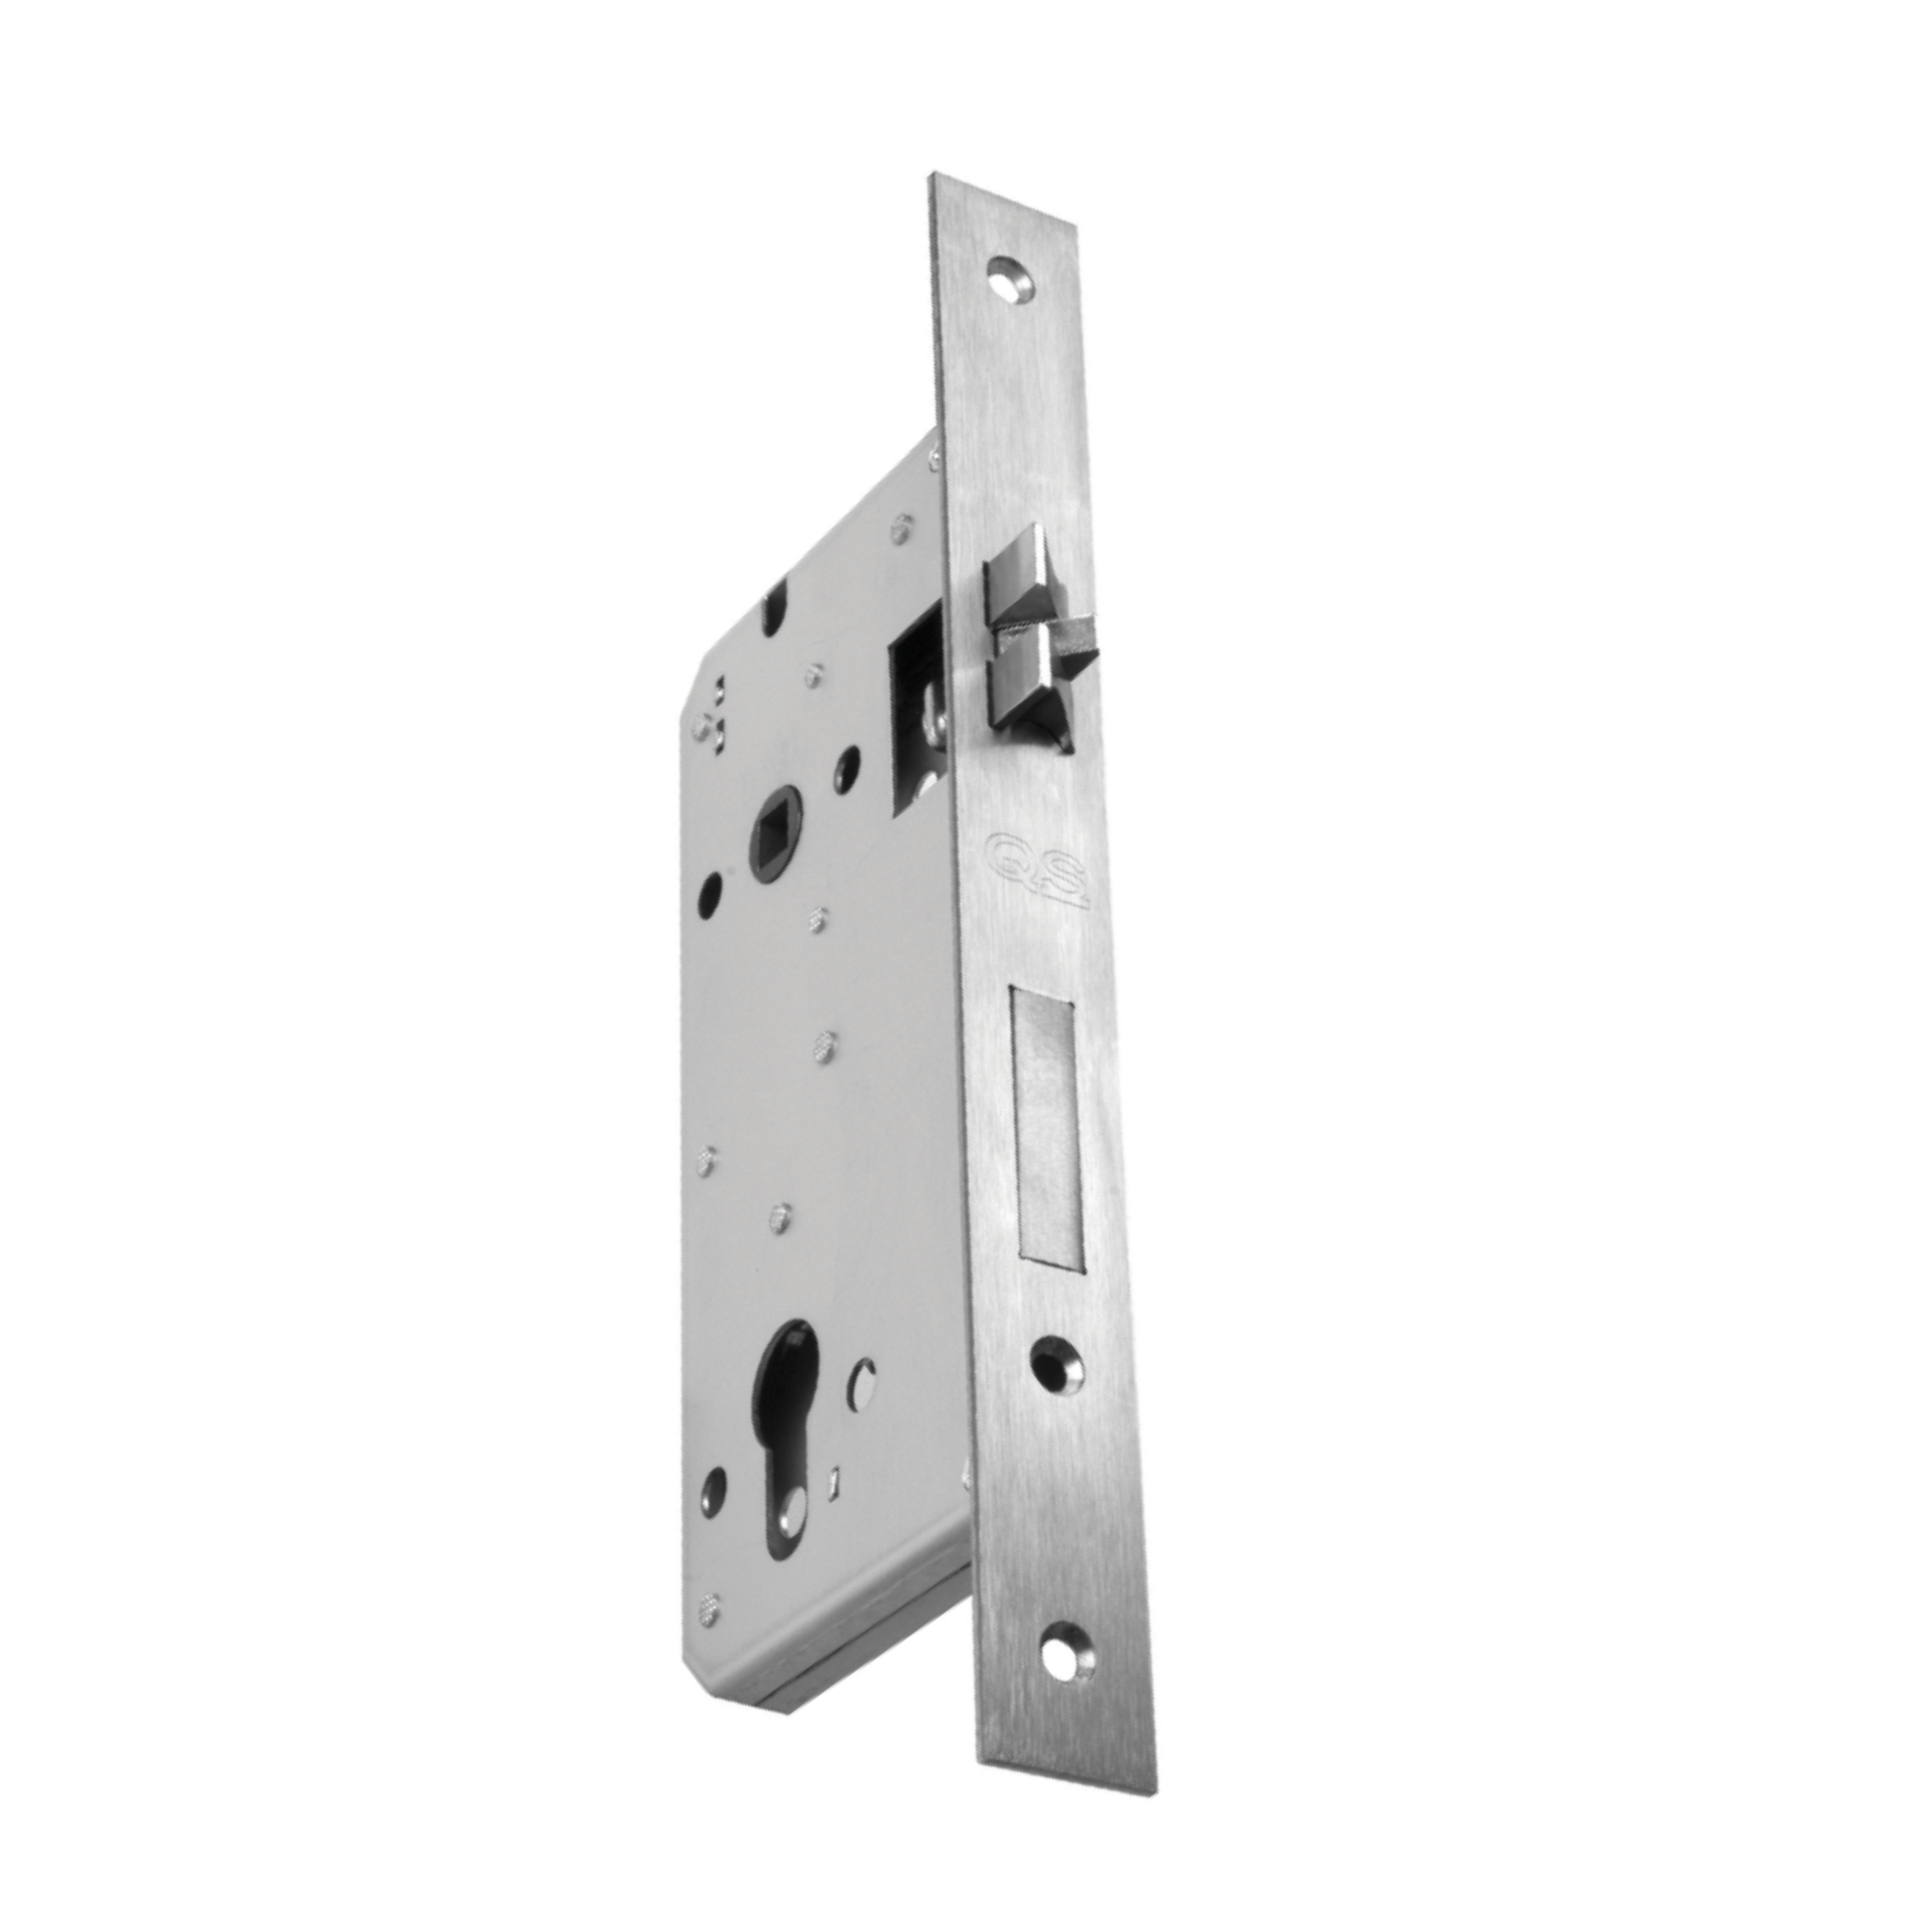 QS8555/SS, Latch & Deadbolt Lock, Euro Cylinder, Excluding Cylinder, 55mm (Backset), 85mm (ctc), Stainless Steel, QS